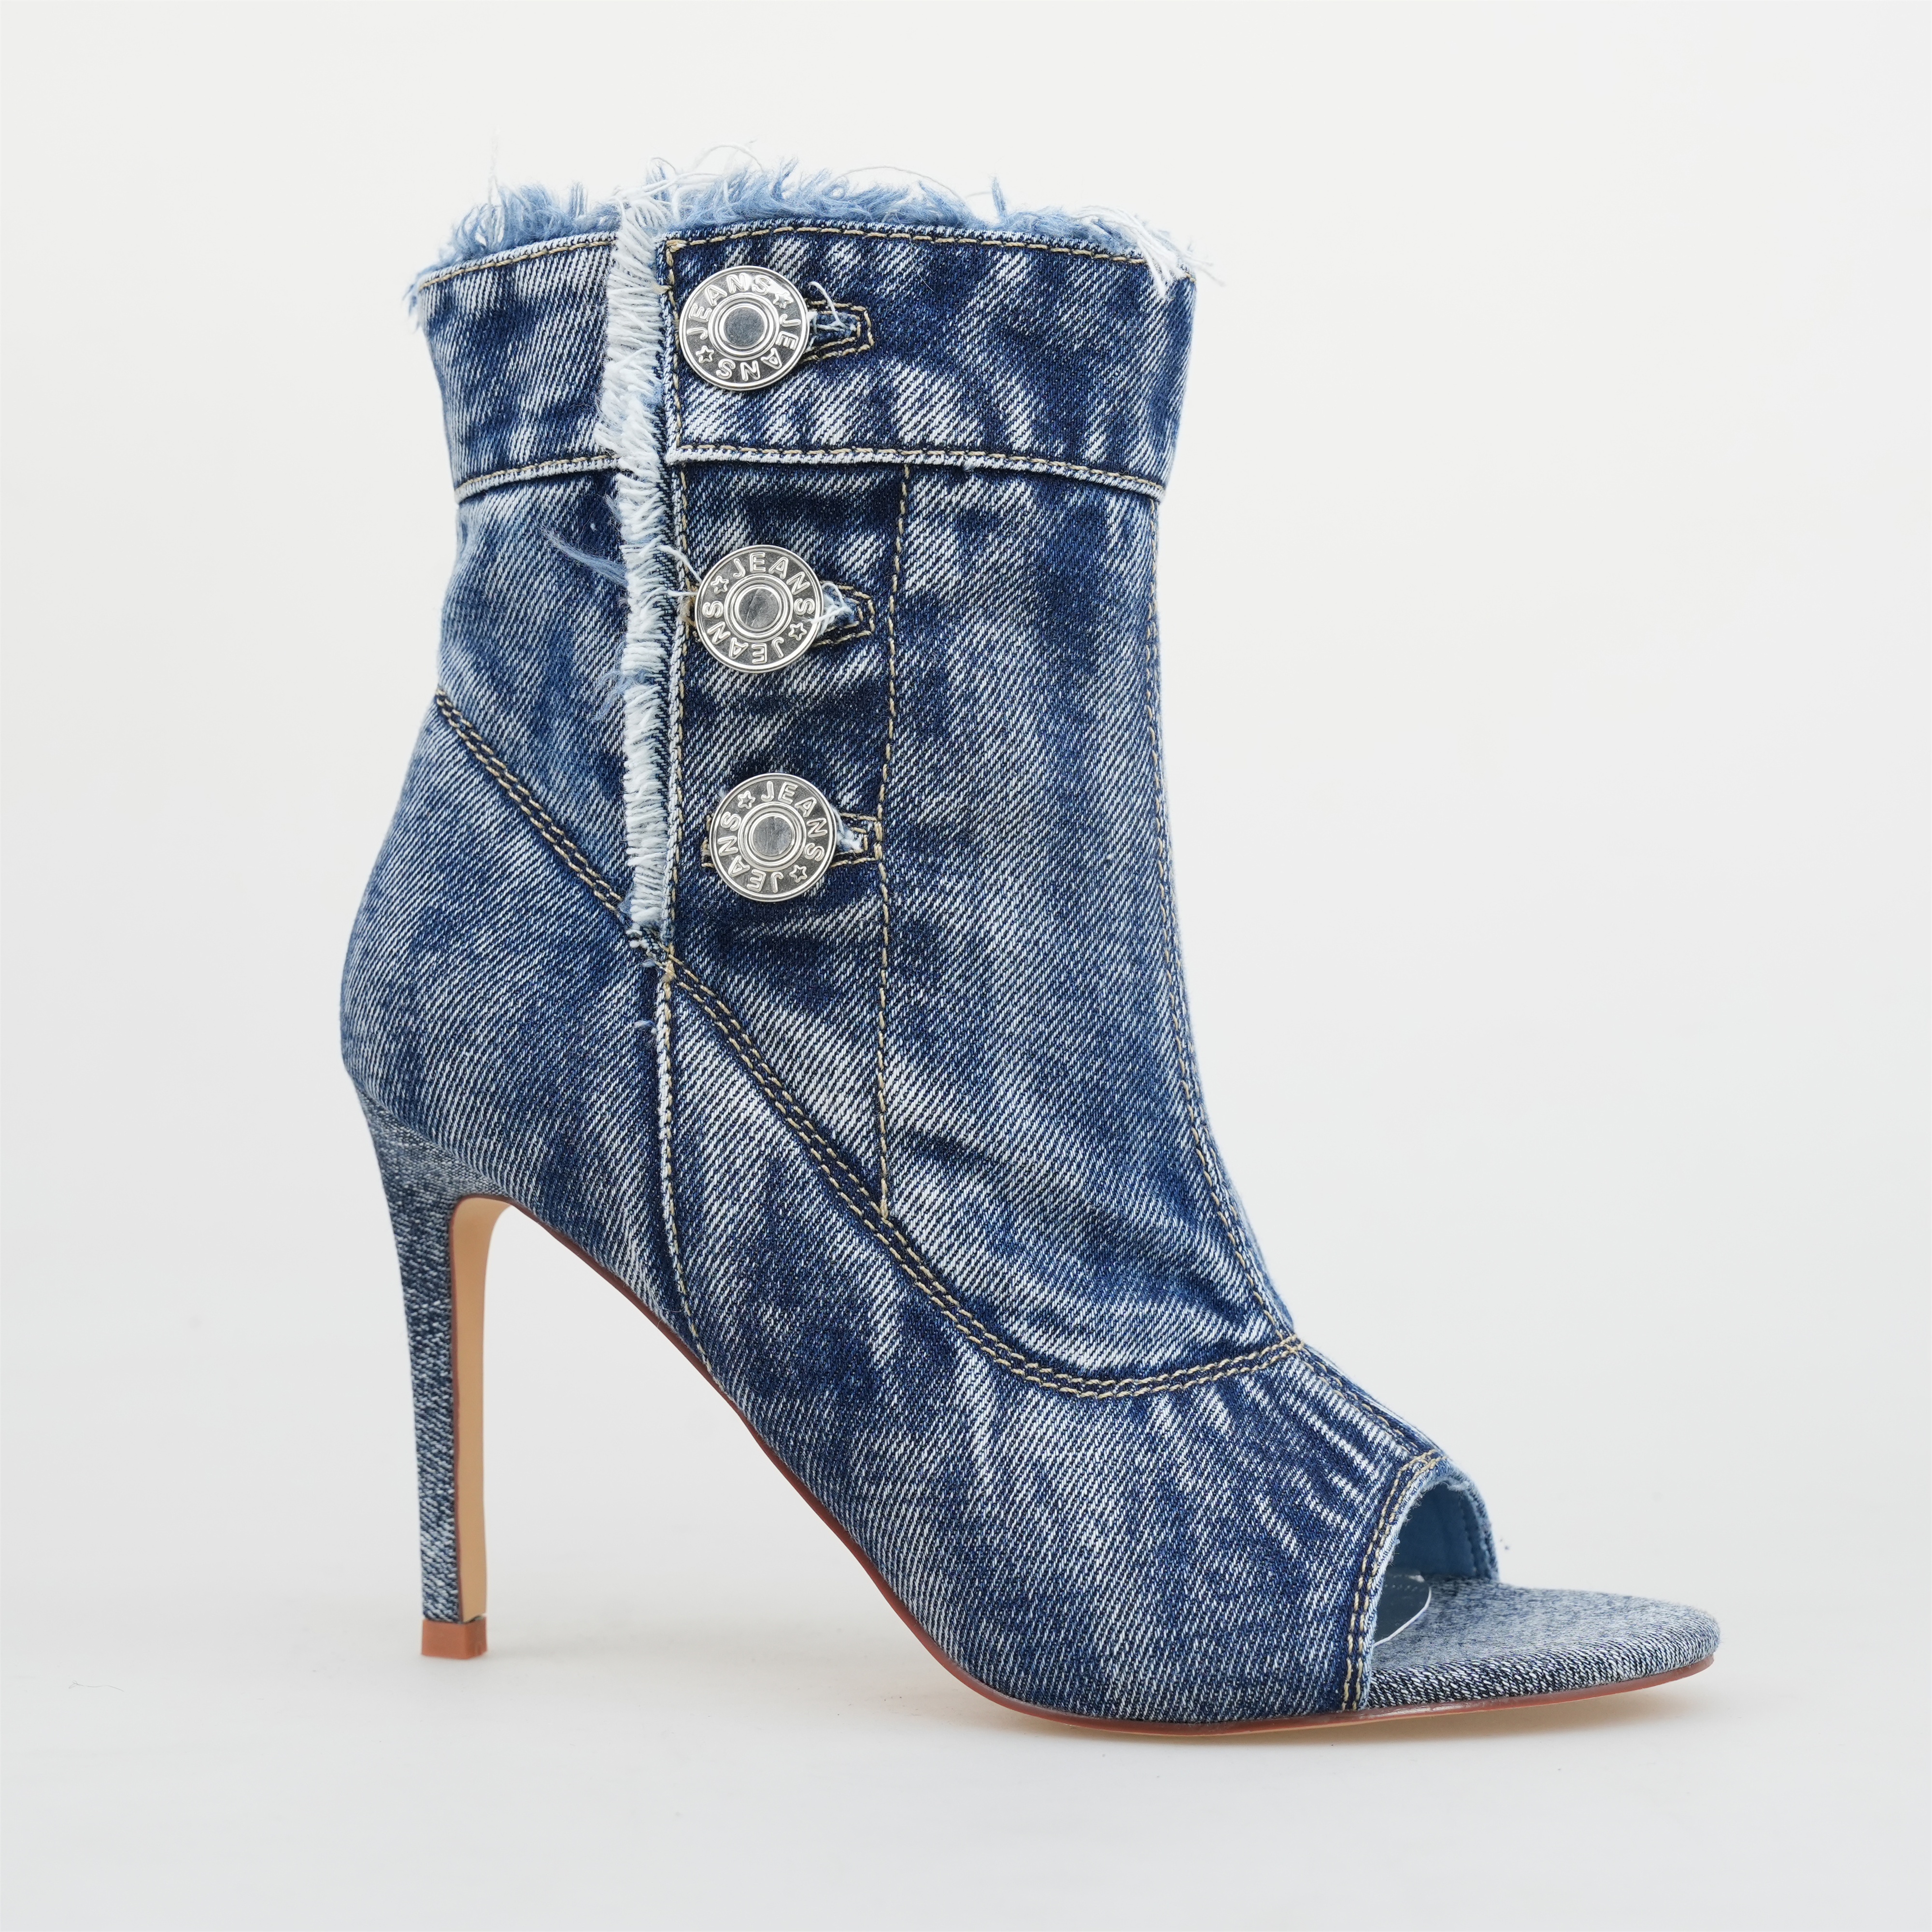 TAAFO Peep Toe High Heel Blue Denim Ankle Boots Women Round Toe Booties With Three Buttons